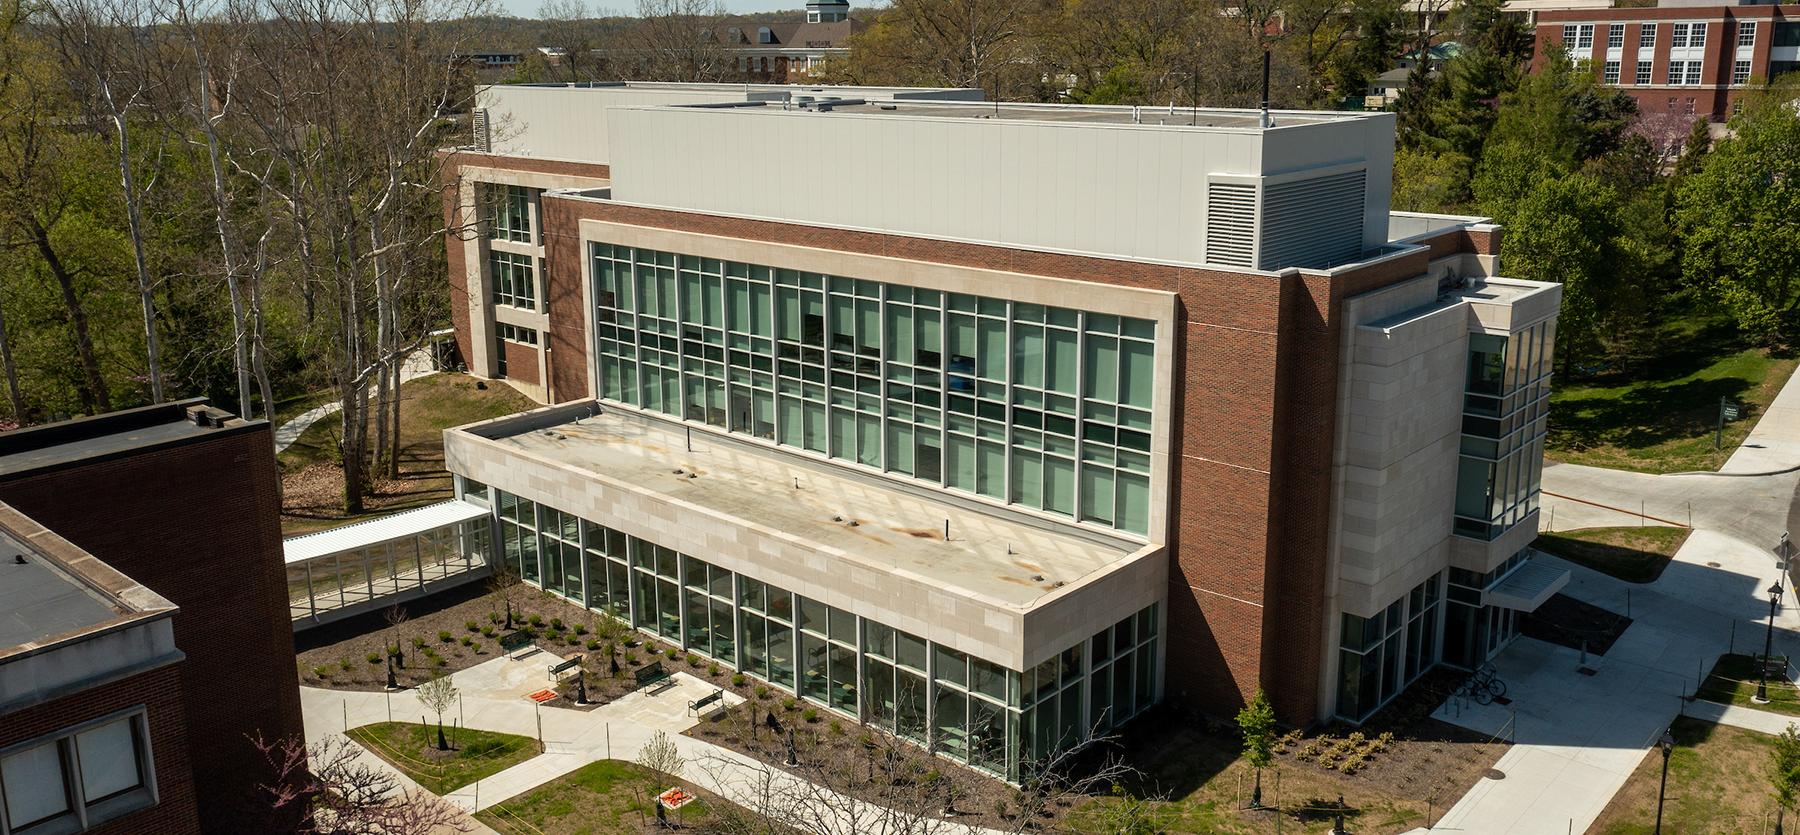 Exterior of the new chemistry building on Ohio University's Athens campus